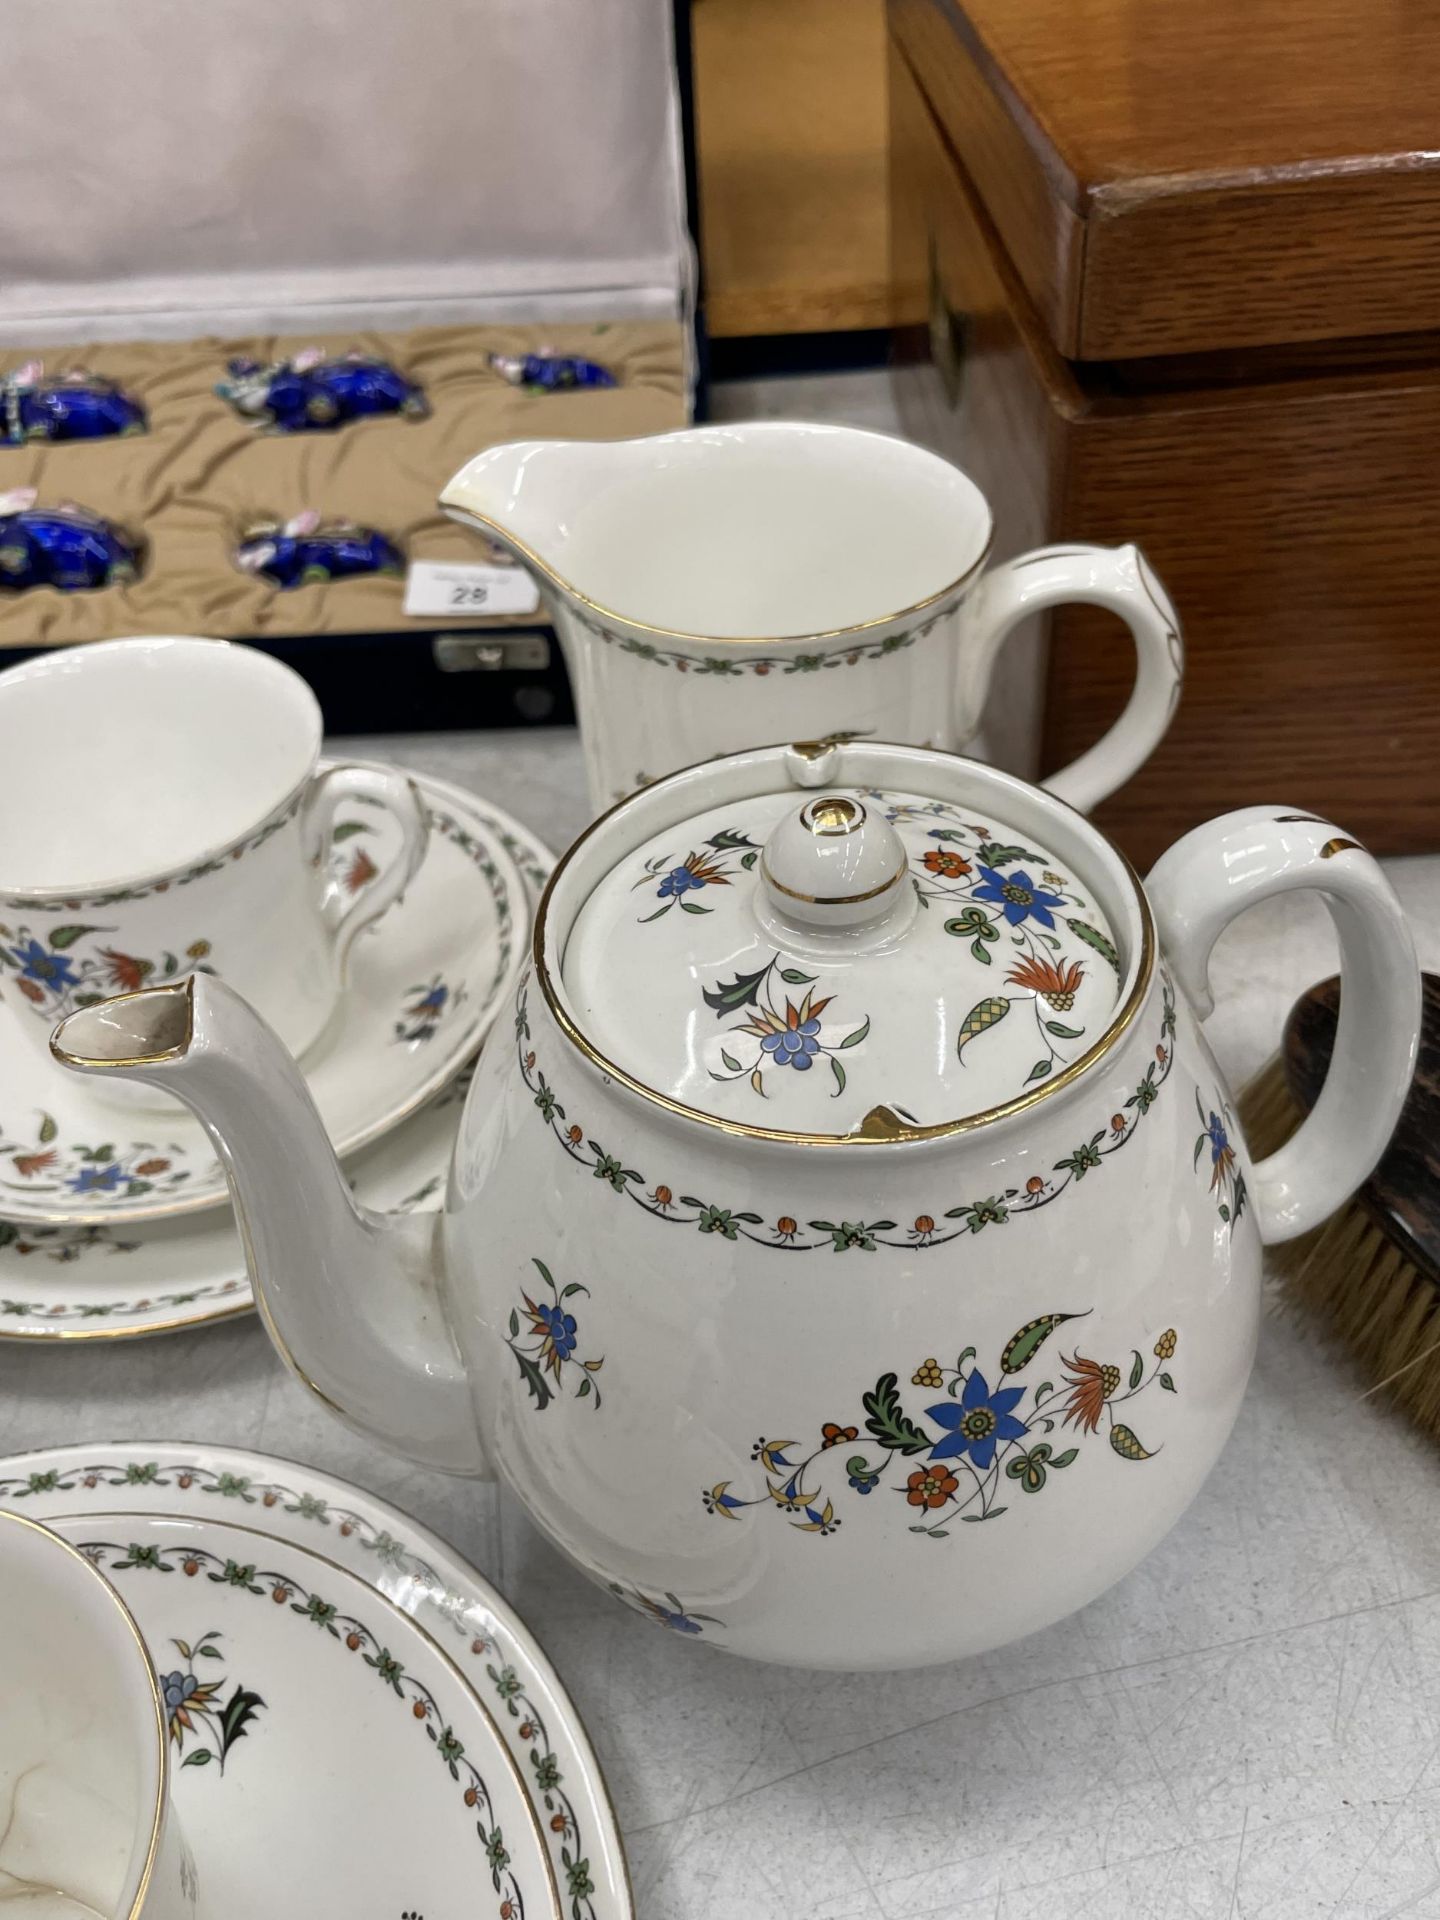 A SHELLEY 'CHELSEA' PATTERN PART TEA SET, TEAPOT, CREAM JUG, CUPS AND SAUCERS ETC - Image 2 of 5